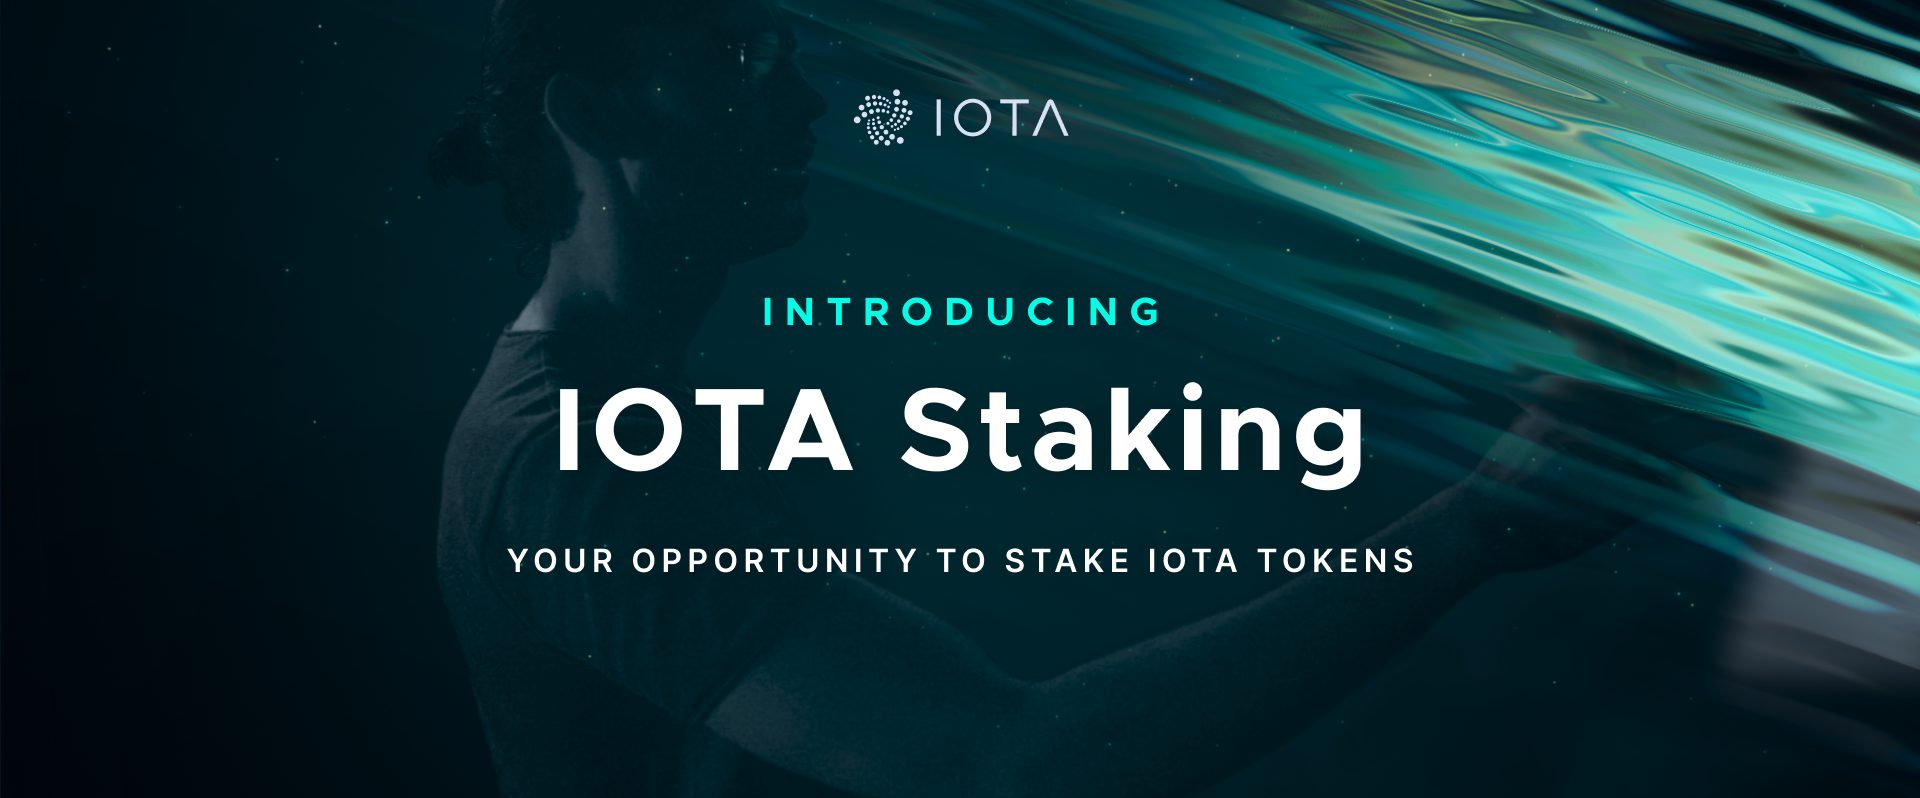 Guest Post by IOTA: IOTA Staking for Assembly: Round 6 | CoinMarketCap